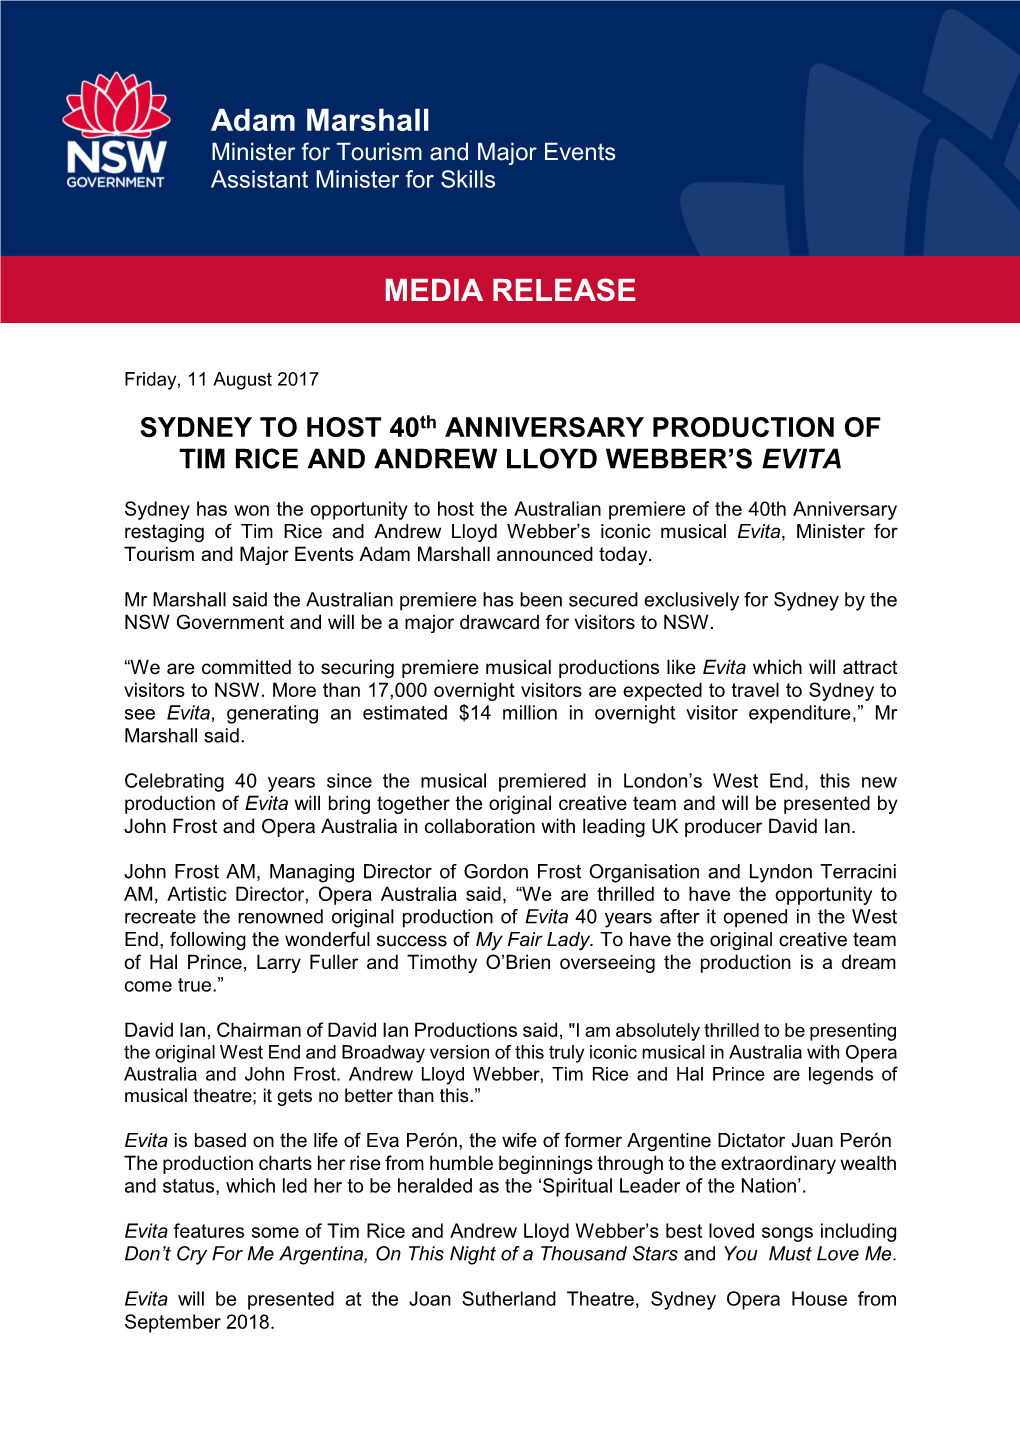 SYDNEY to HOST 40Th ANNIVERSARY PRODUCTION of TIM RICE and ANDREW LLOYD WEBBER’S EVITA